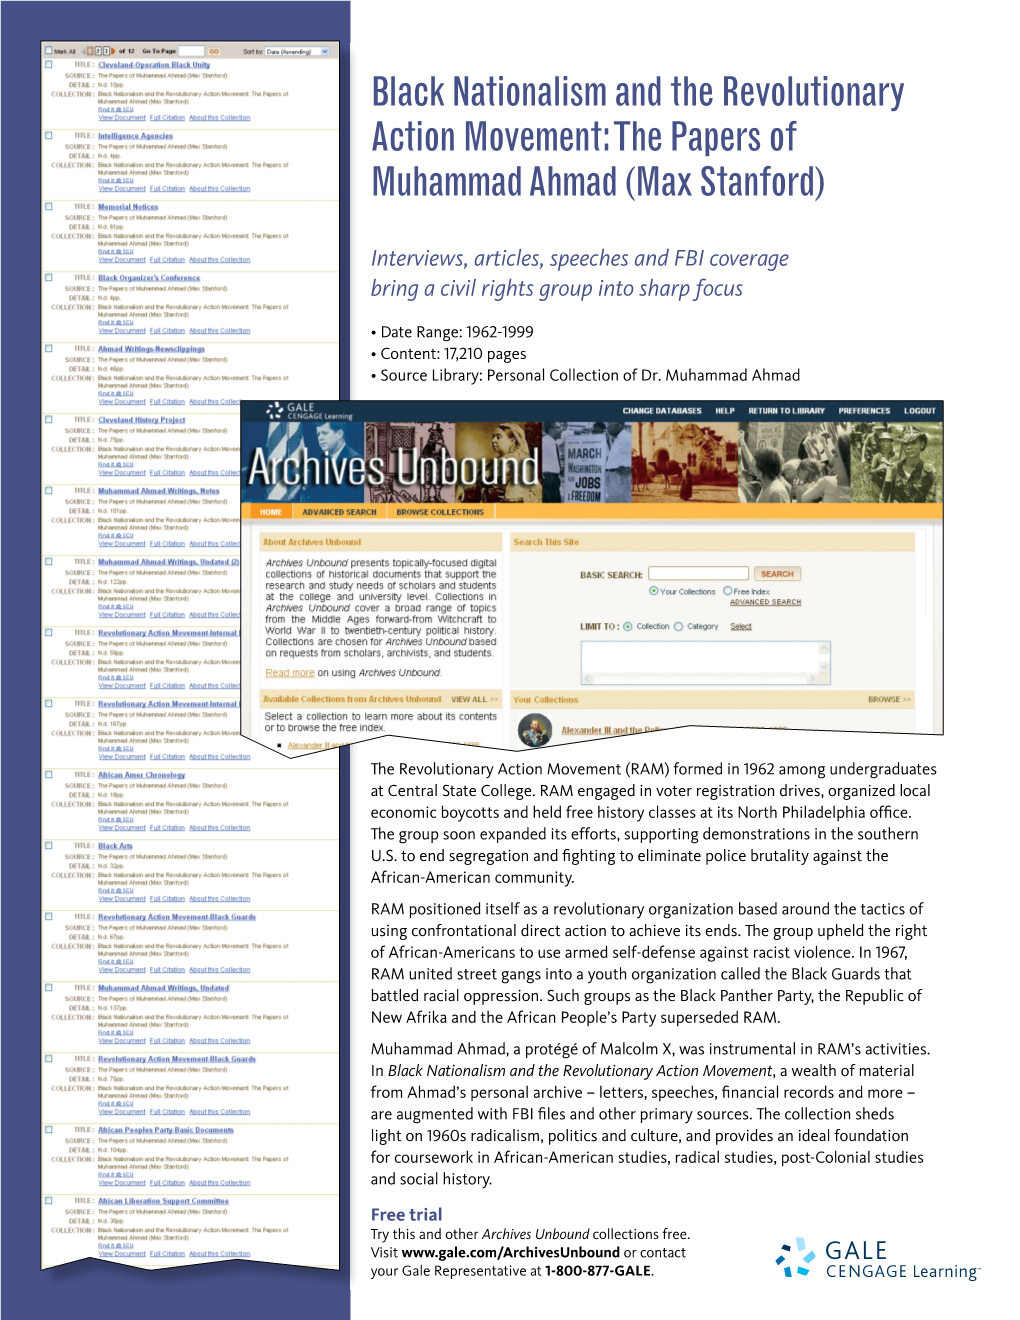 Black Nationalism and the Revolutionary Action Movement: the Papers of Muhammad Ahmad (Max Stanford)